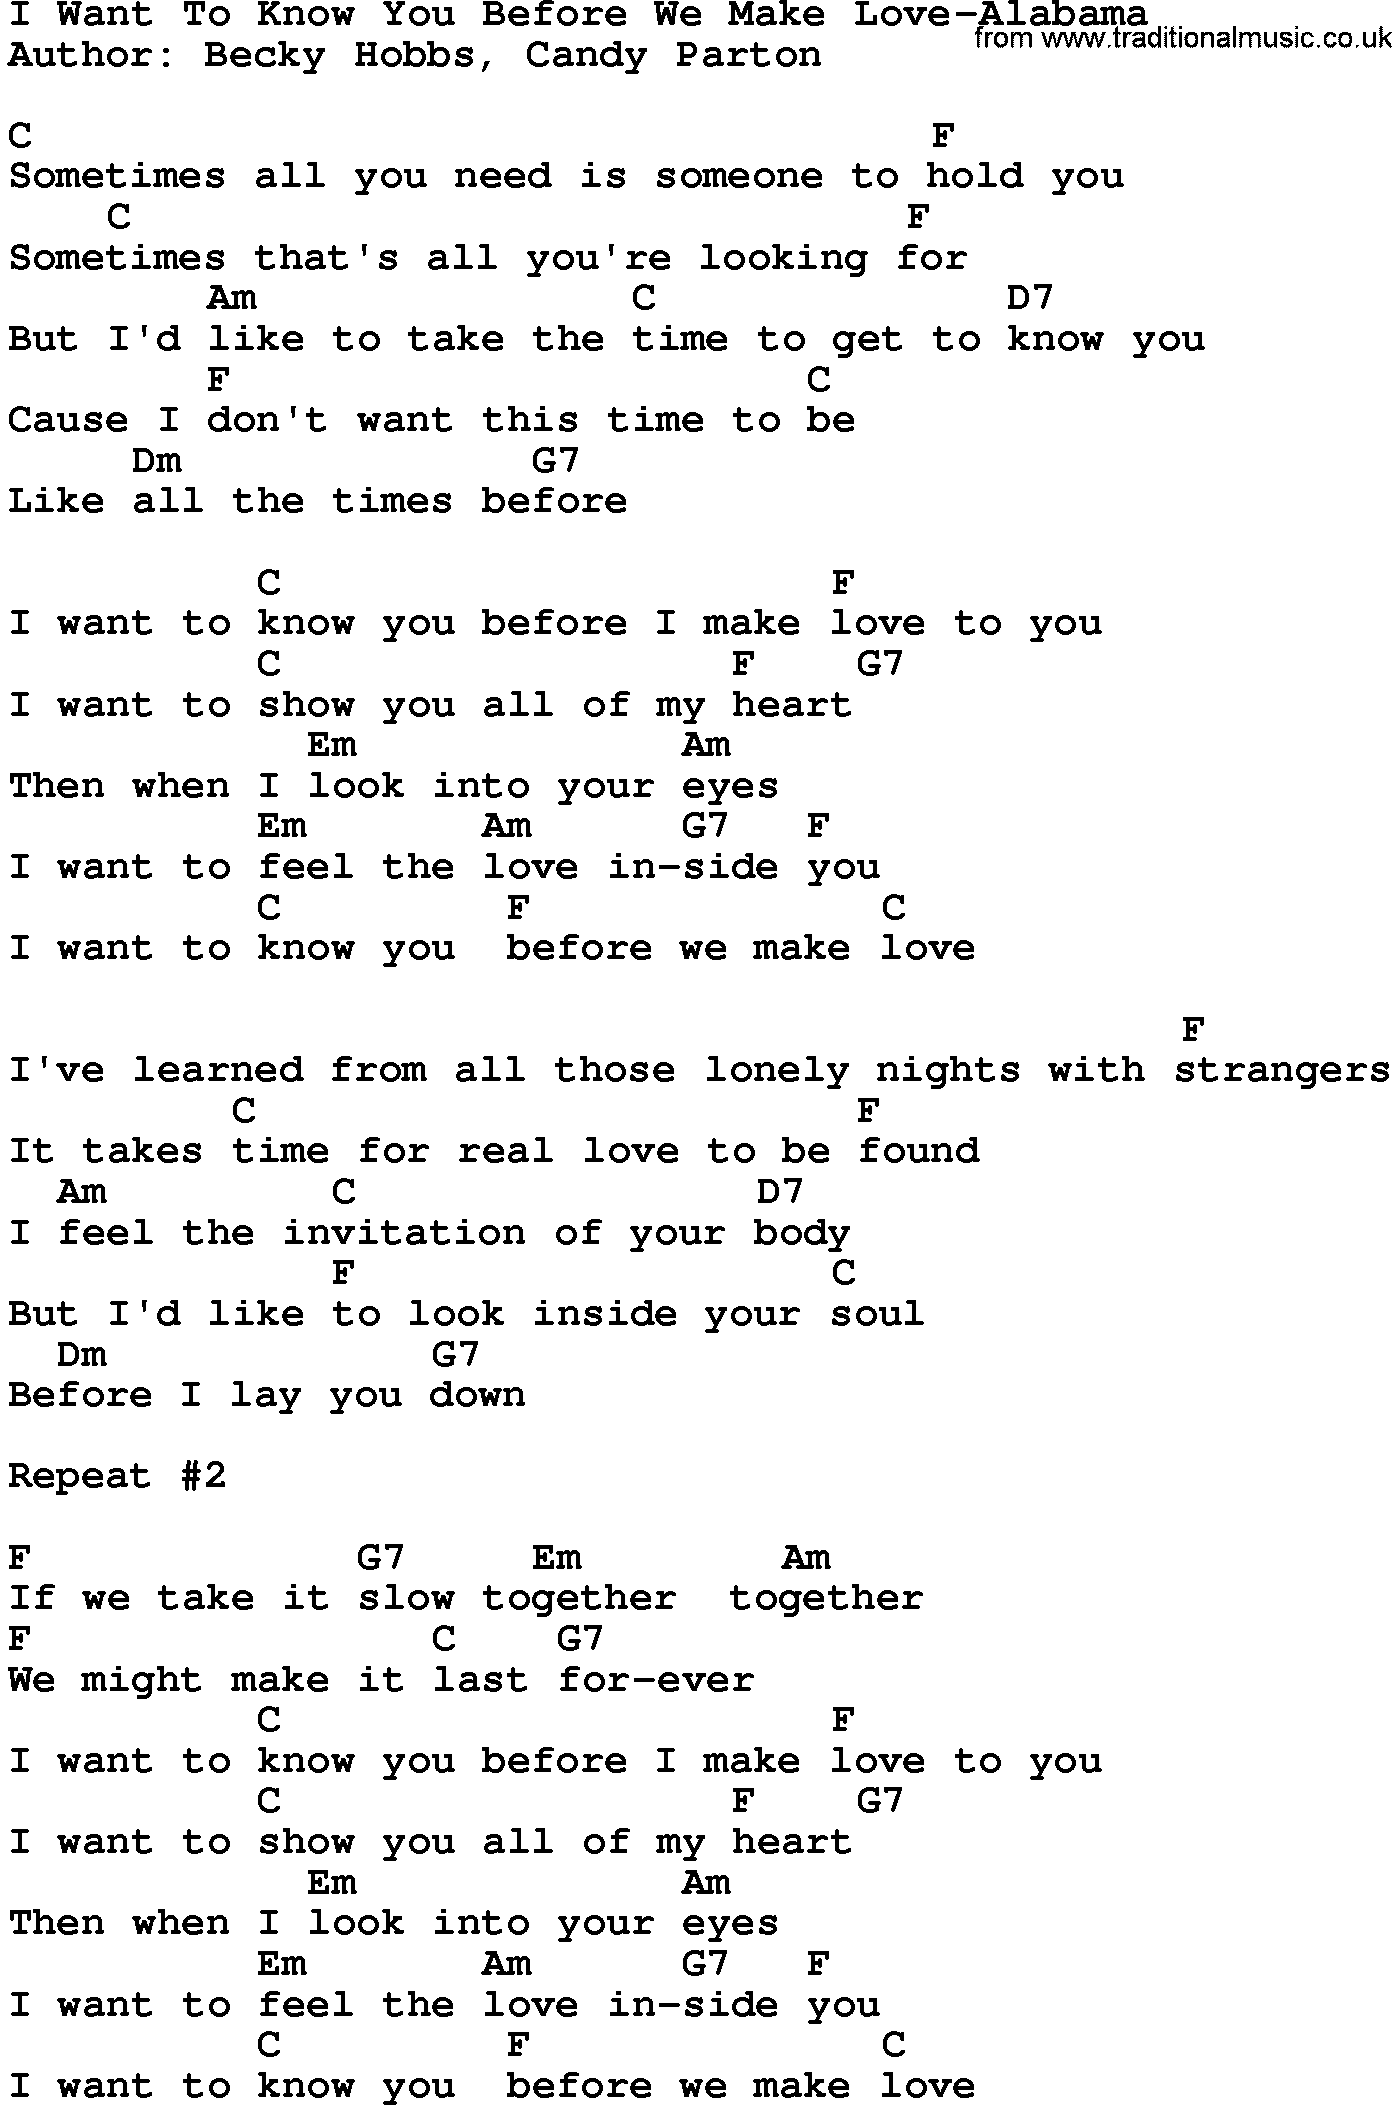 Country music song: I Want To Know You Before We Make Love-Alabama lyrics and chords